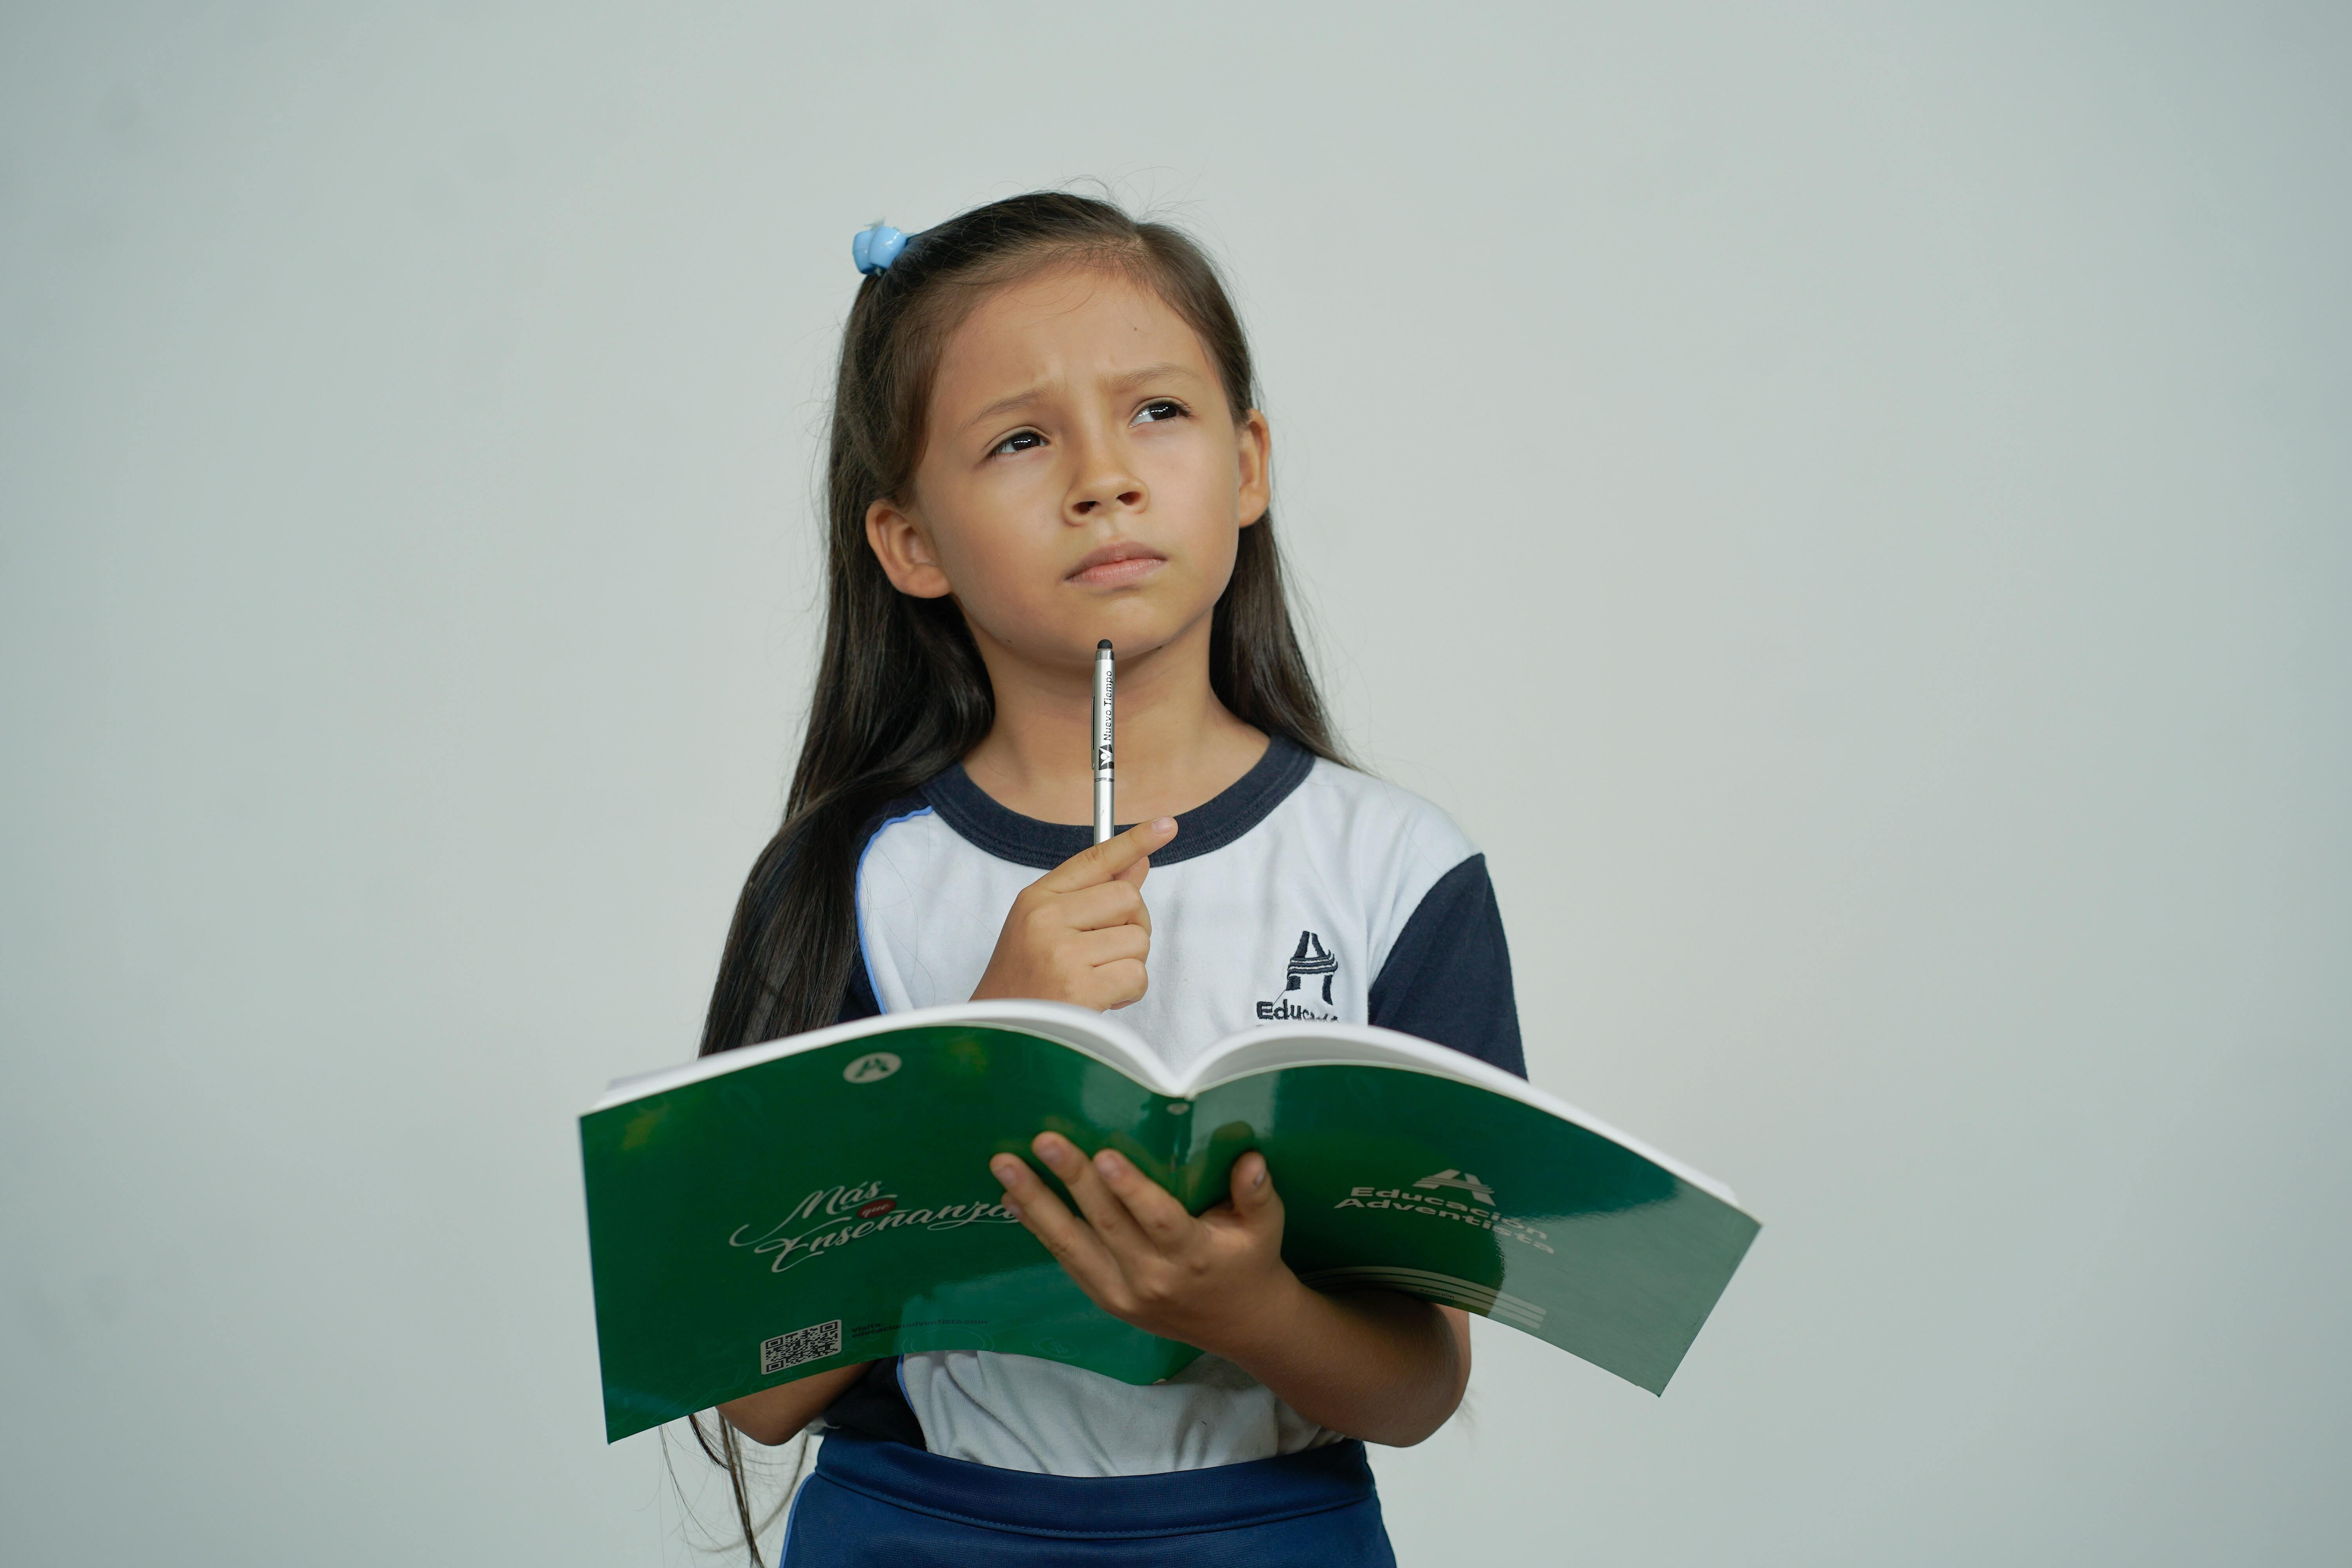 A child thinking while holding a book